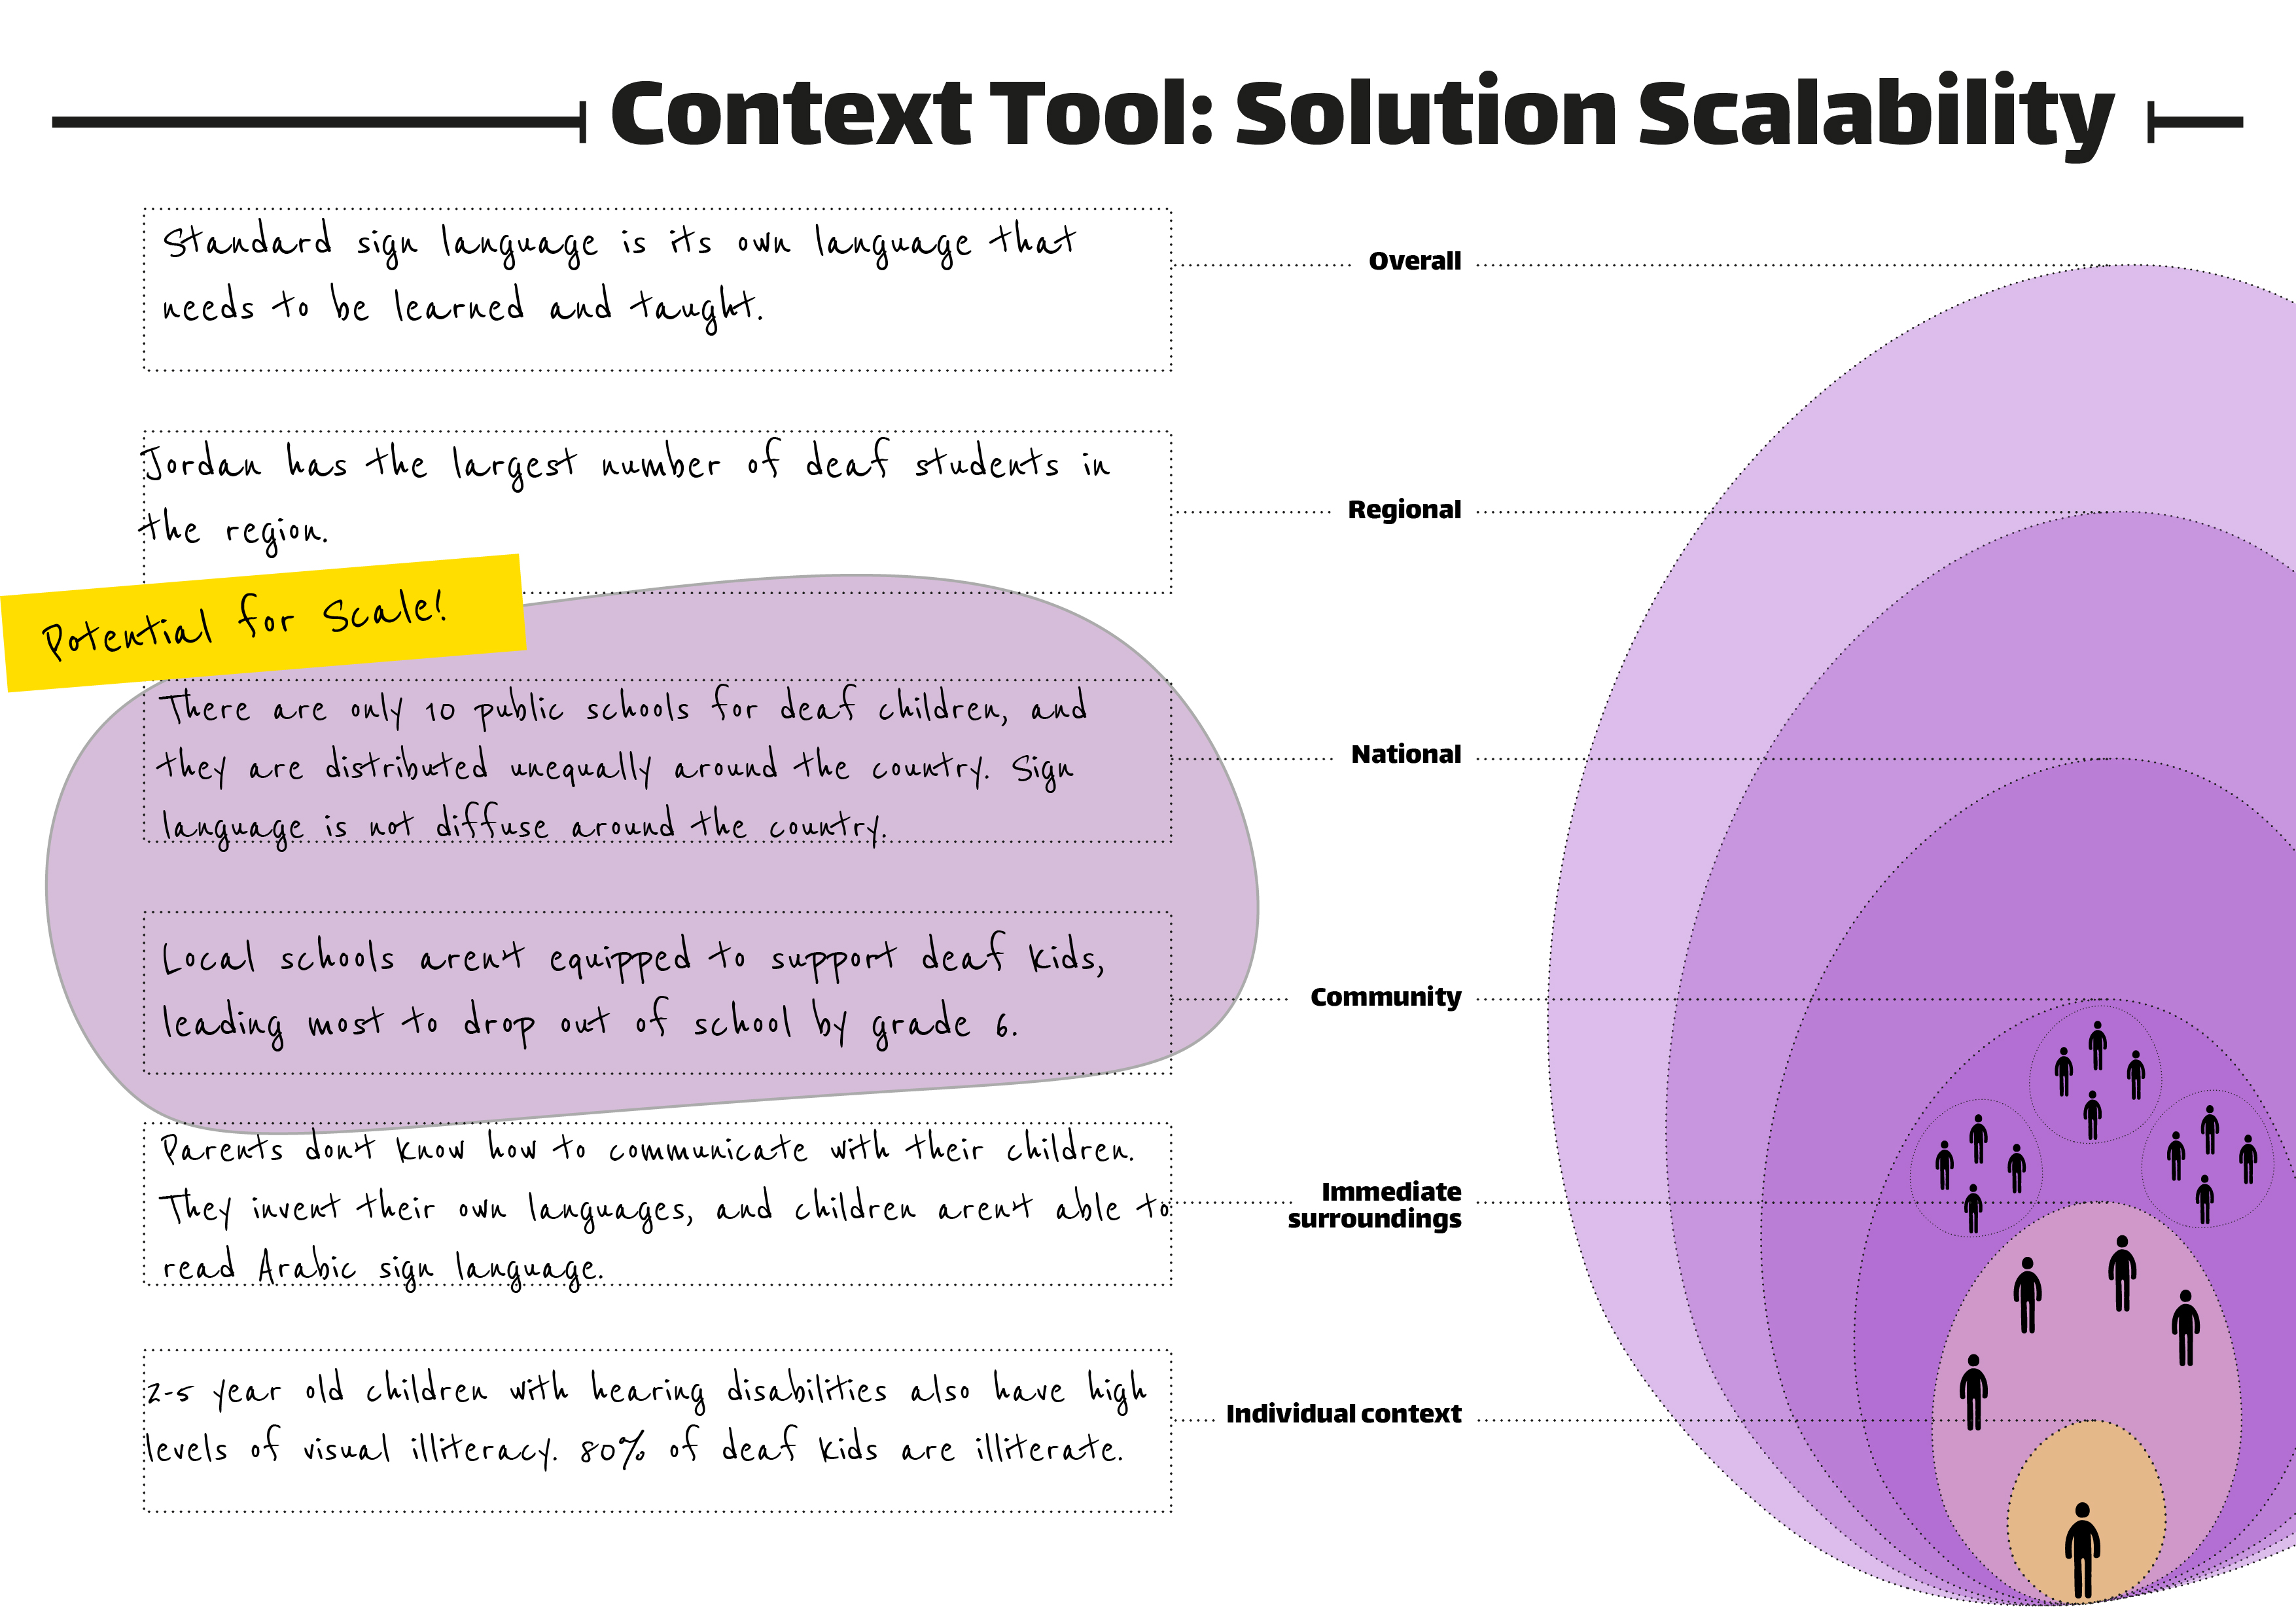 Context Tool: Scaling Solutions image